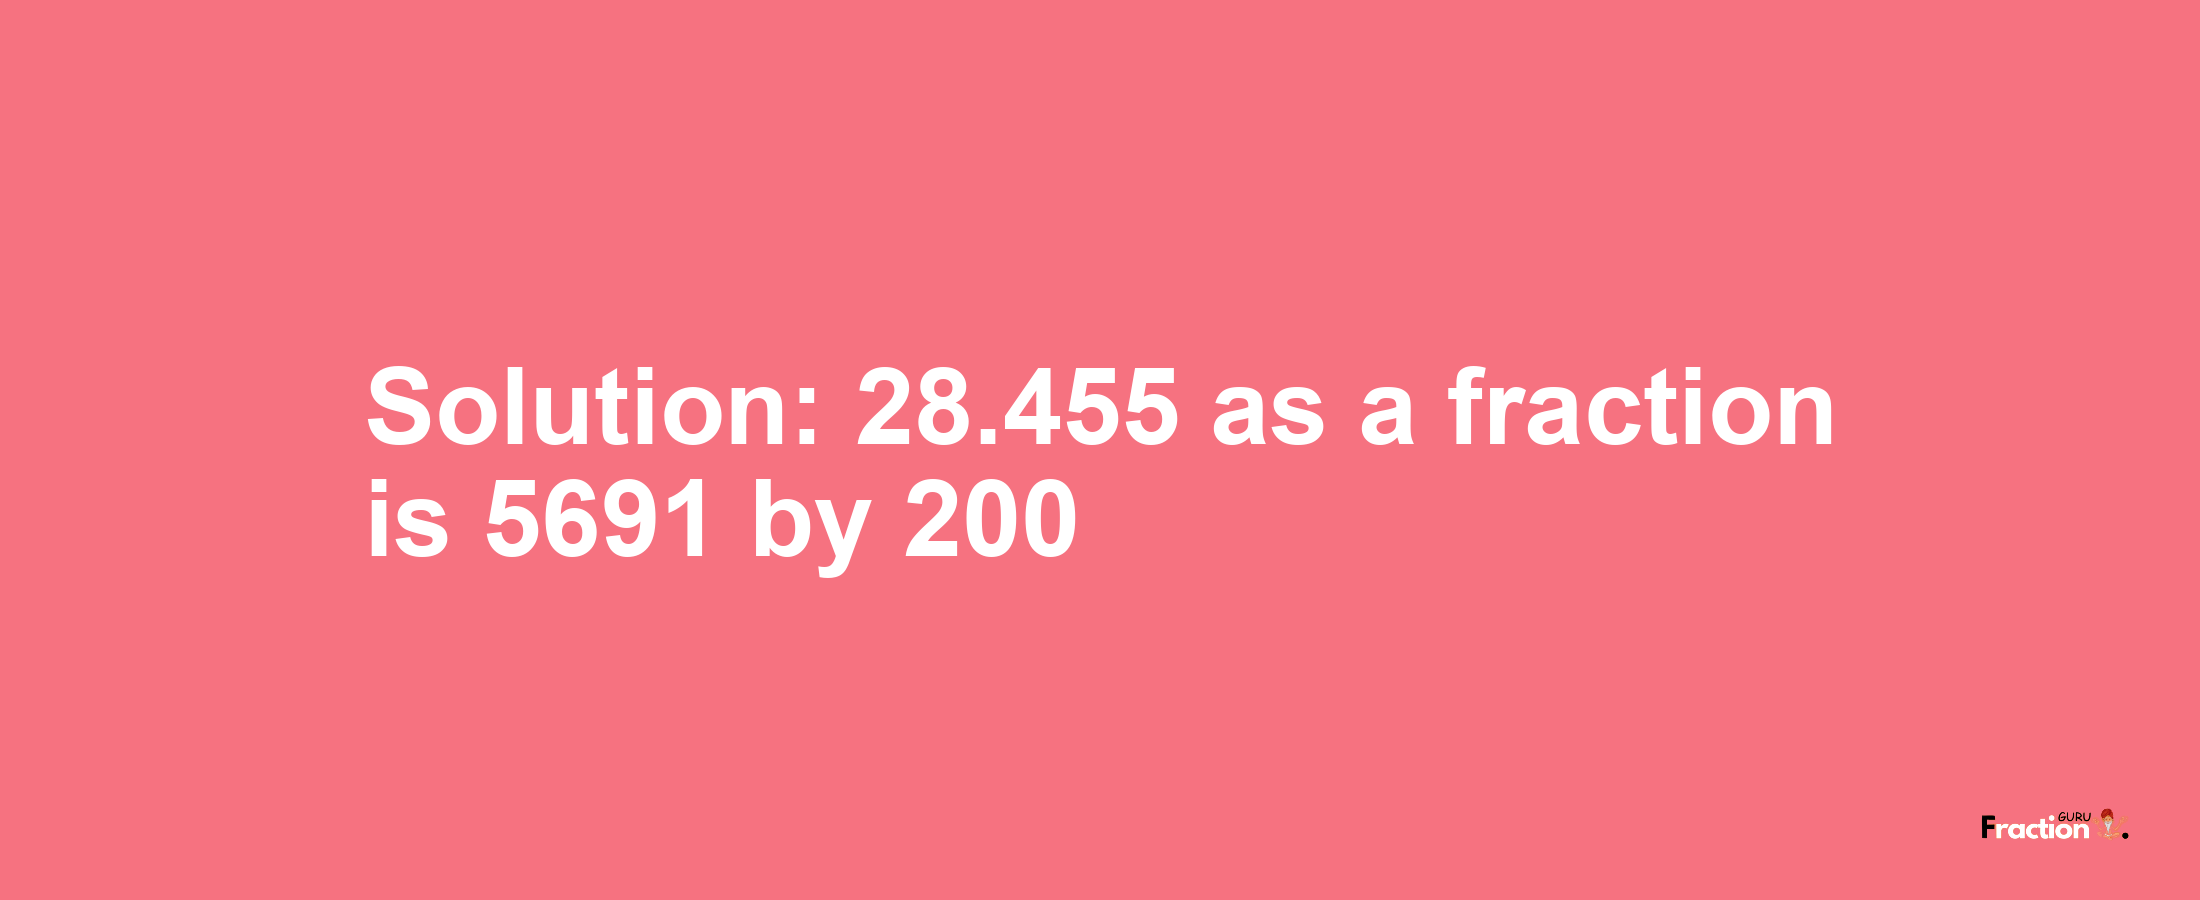 Solution:28.455 as a fraction is 5691/200